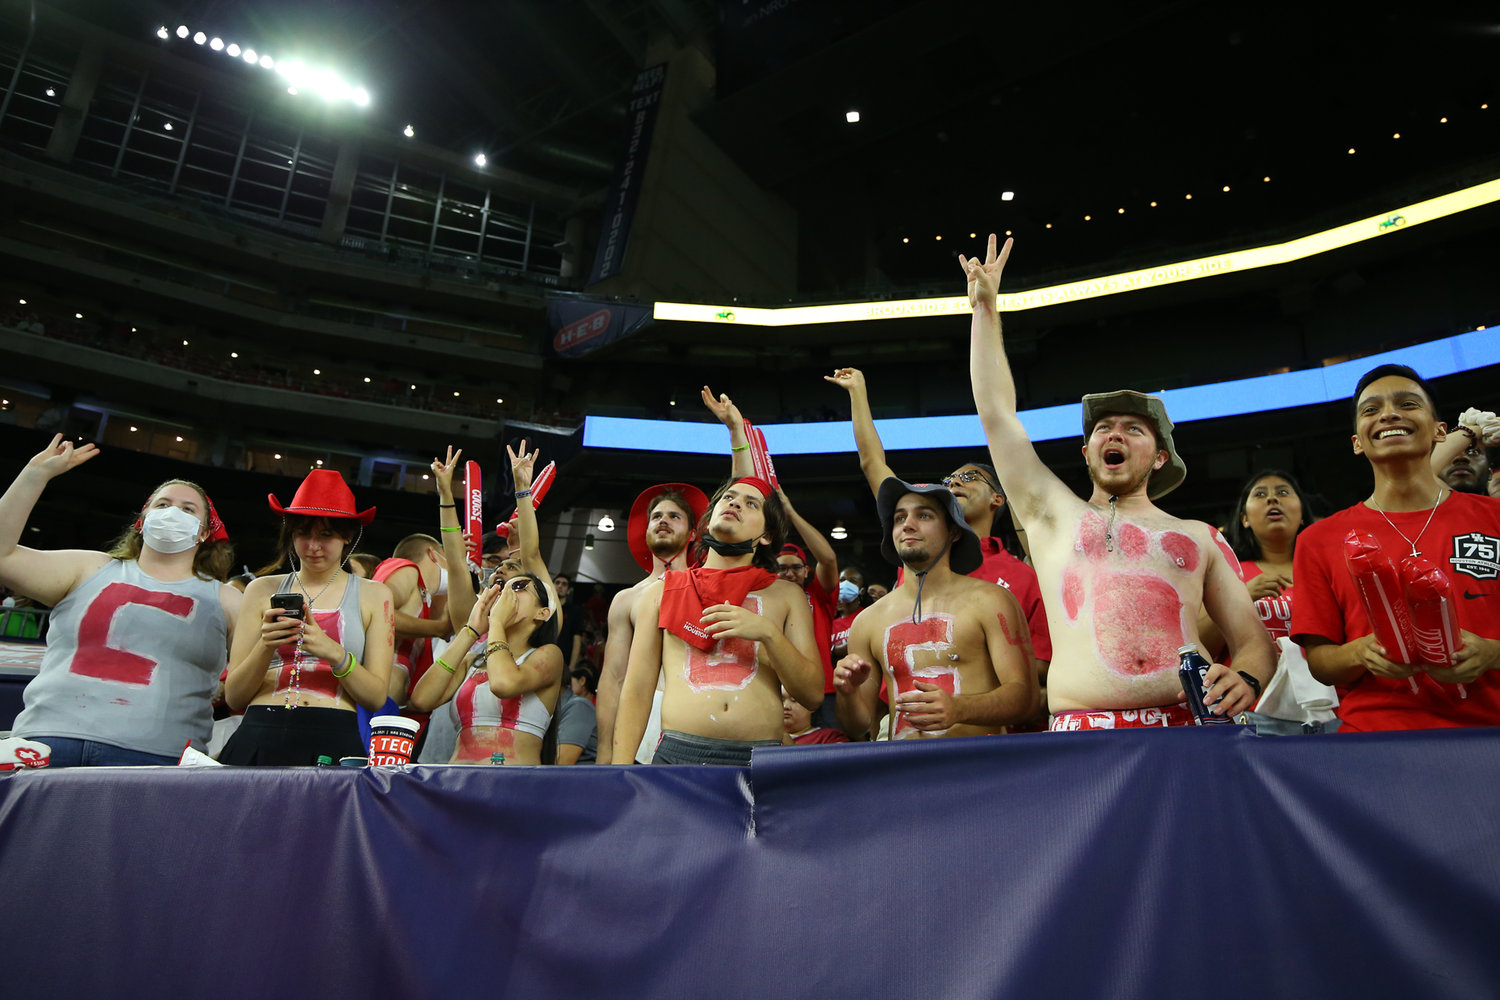 The Houston Cougars student section during an NCAA football game between Houston and Texas Tech on September 4, 2021 in Houston, Texas.